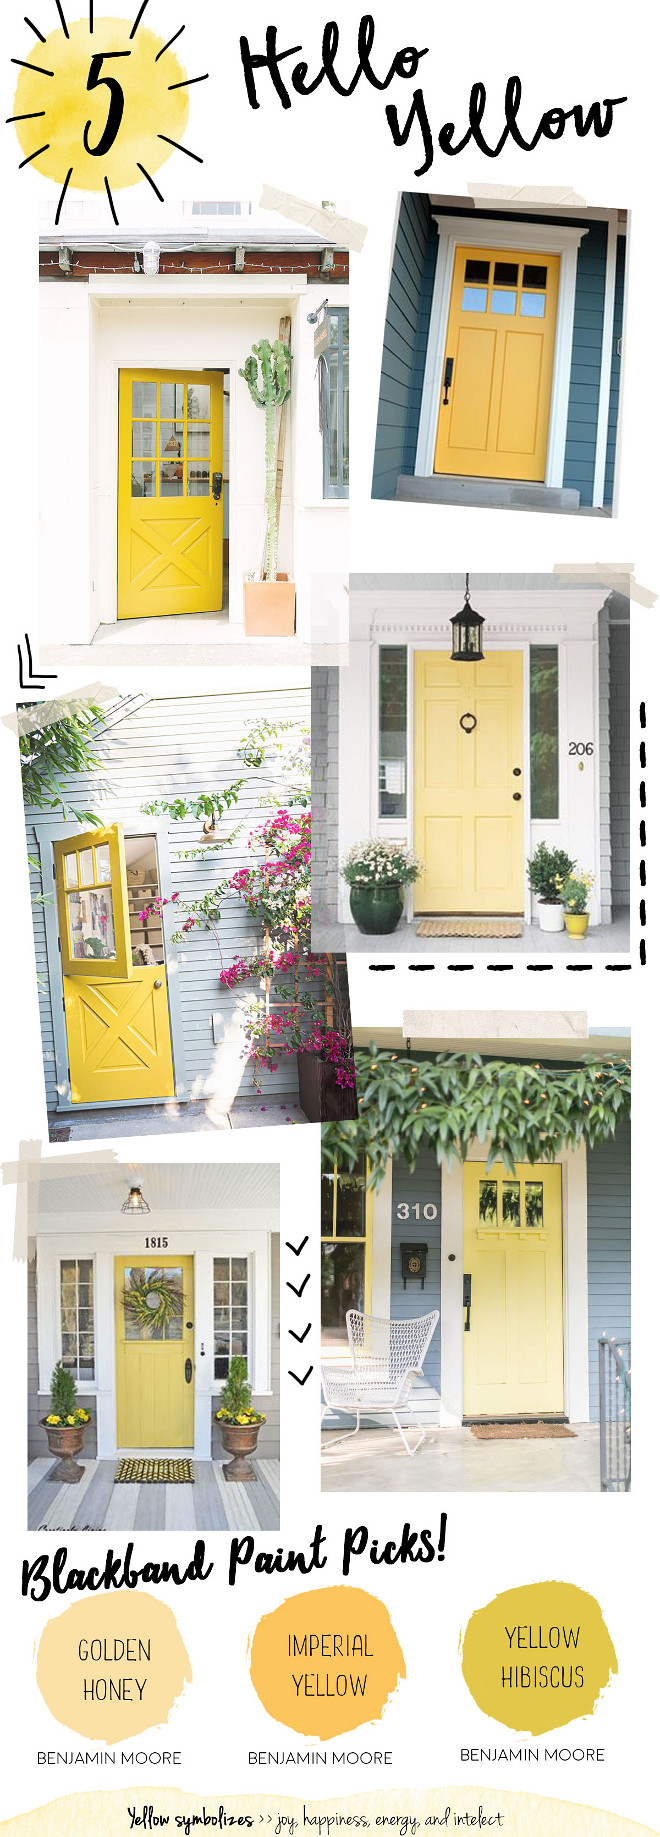 Yellow Door Paint Color. Yellow Front Door Paint Color. Benjamin Moore Golden Honey. Benjamin Moore Imperial Yellow. Benjamin Moore Yellow Hibiscus. Yellow is a cheerful way to welcome guests into your home. Representing the sun, a bright shade of yellow can bring happiness, warmth and energy to your front door. This color is best suited for exteriors with neutral tones like whites, grays, and shades of brown. #BenjaminMooreGoldenHoney #BenjaminMooreImperialYellow #BenjaminMooreYellowHibiscus